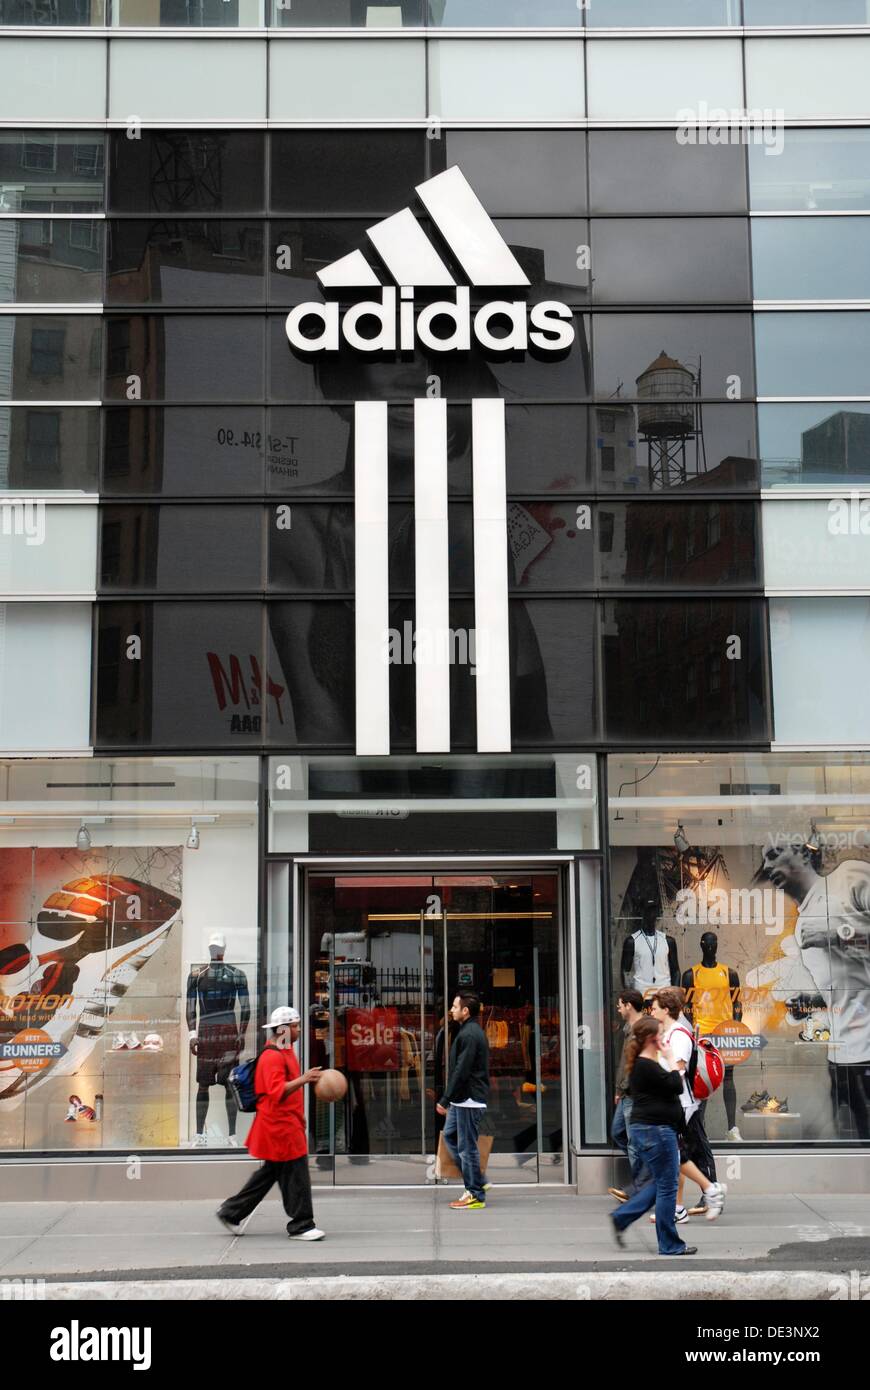 Adidas Store Nyc High Resolution Stock Photography and Images - Alamy